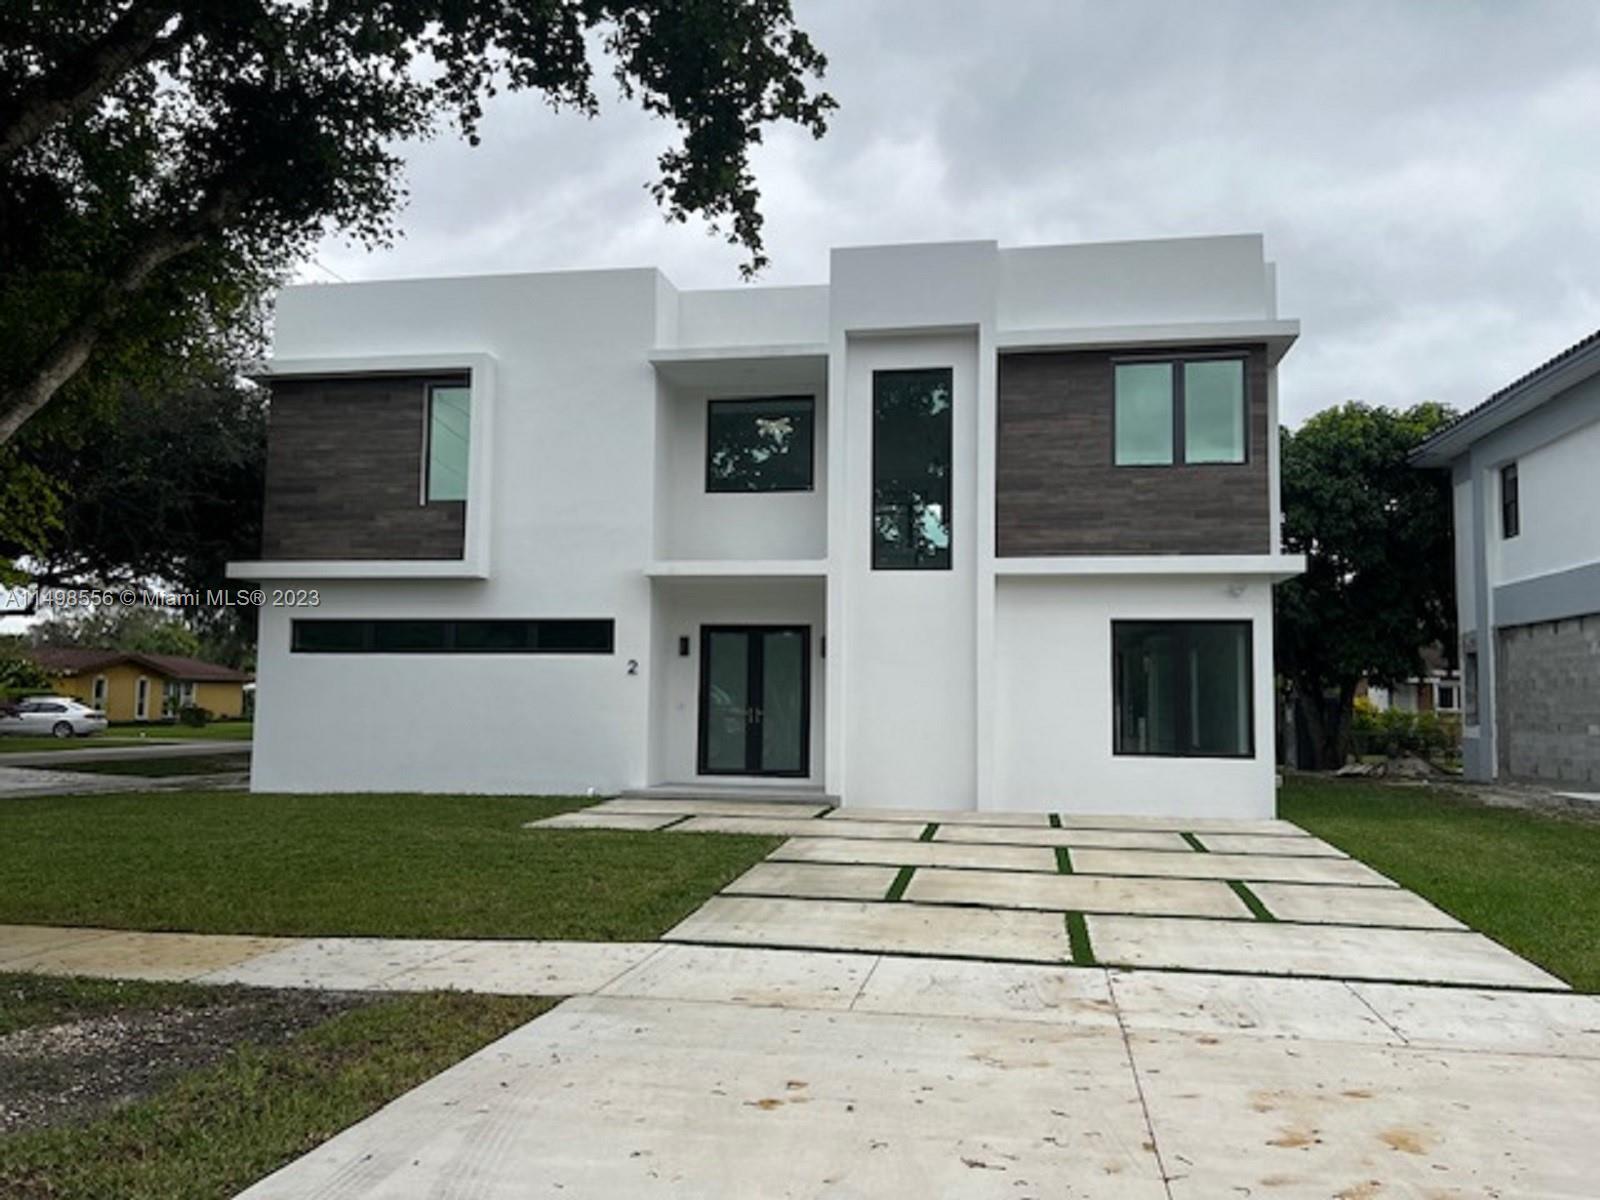 Photo of 2 Hough Dr in Miami Springs, FL